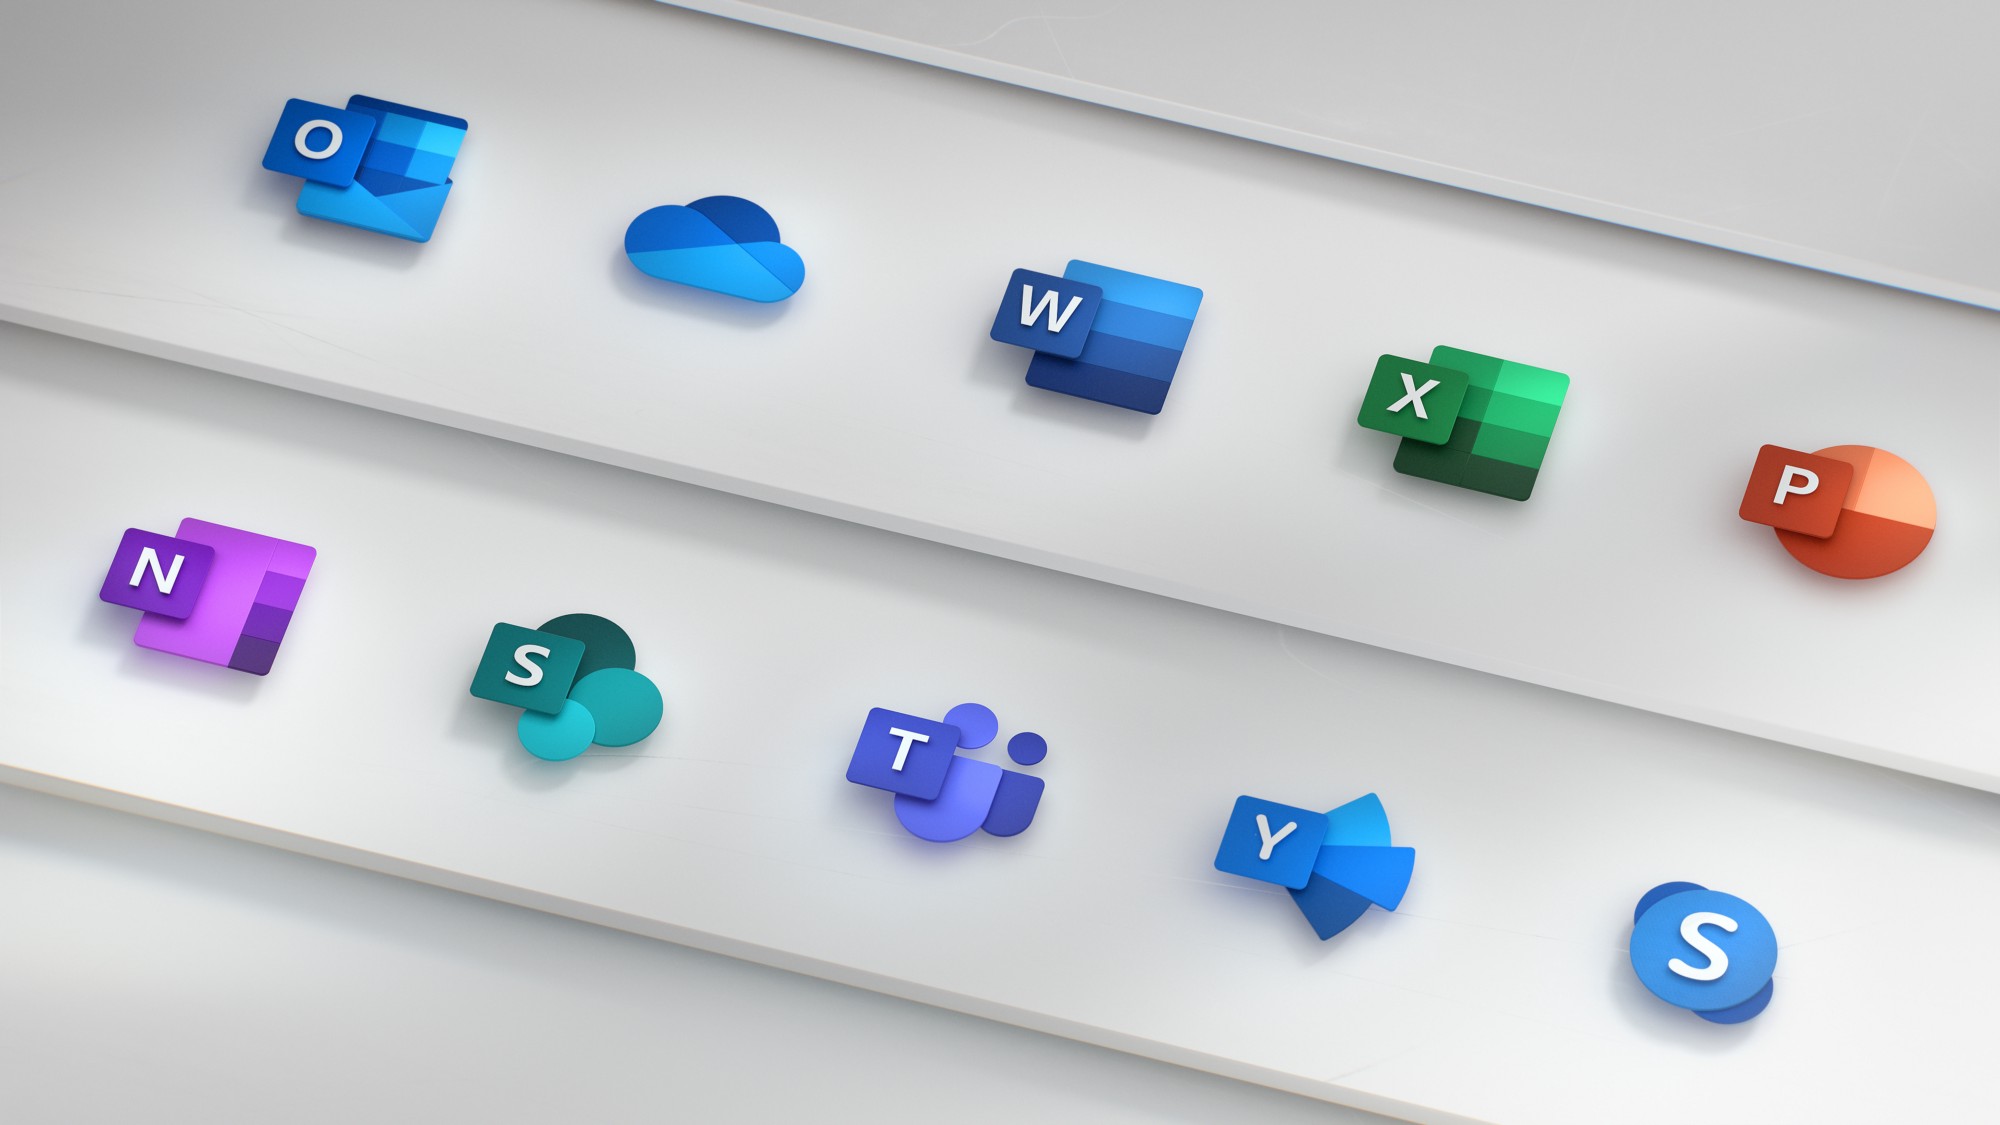 Microsoft Office's new icons